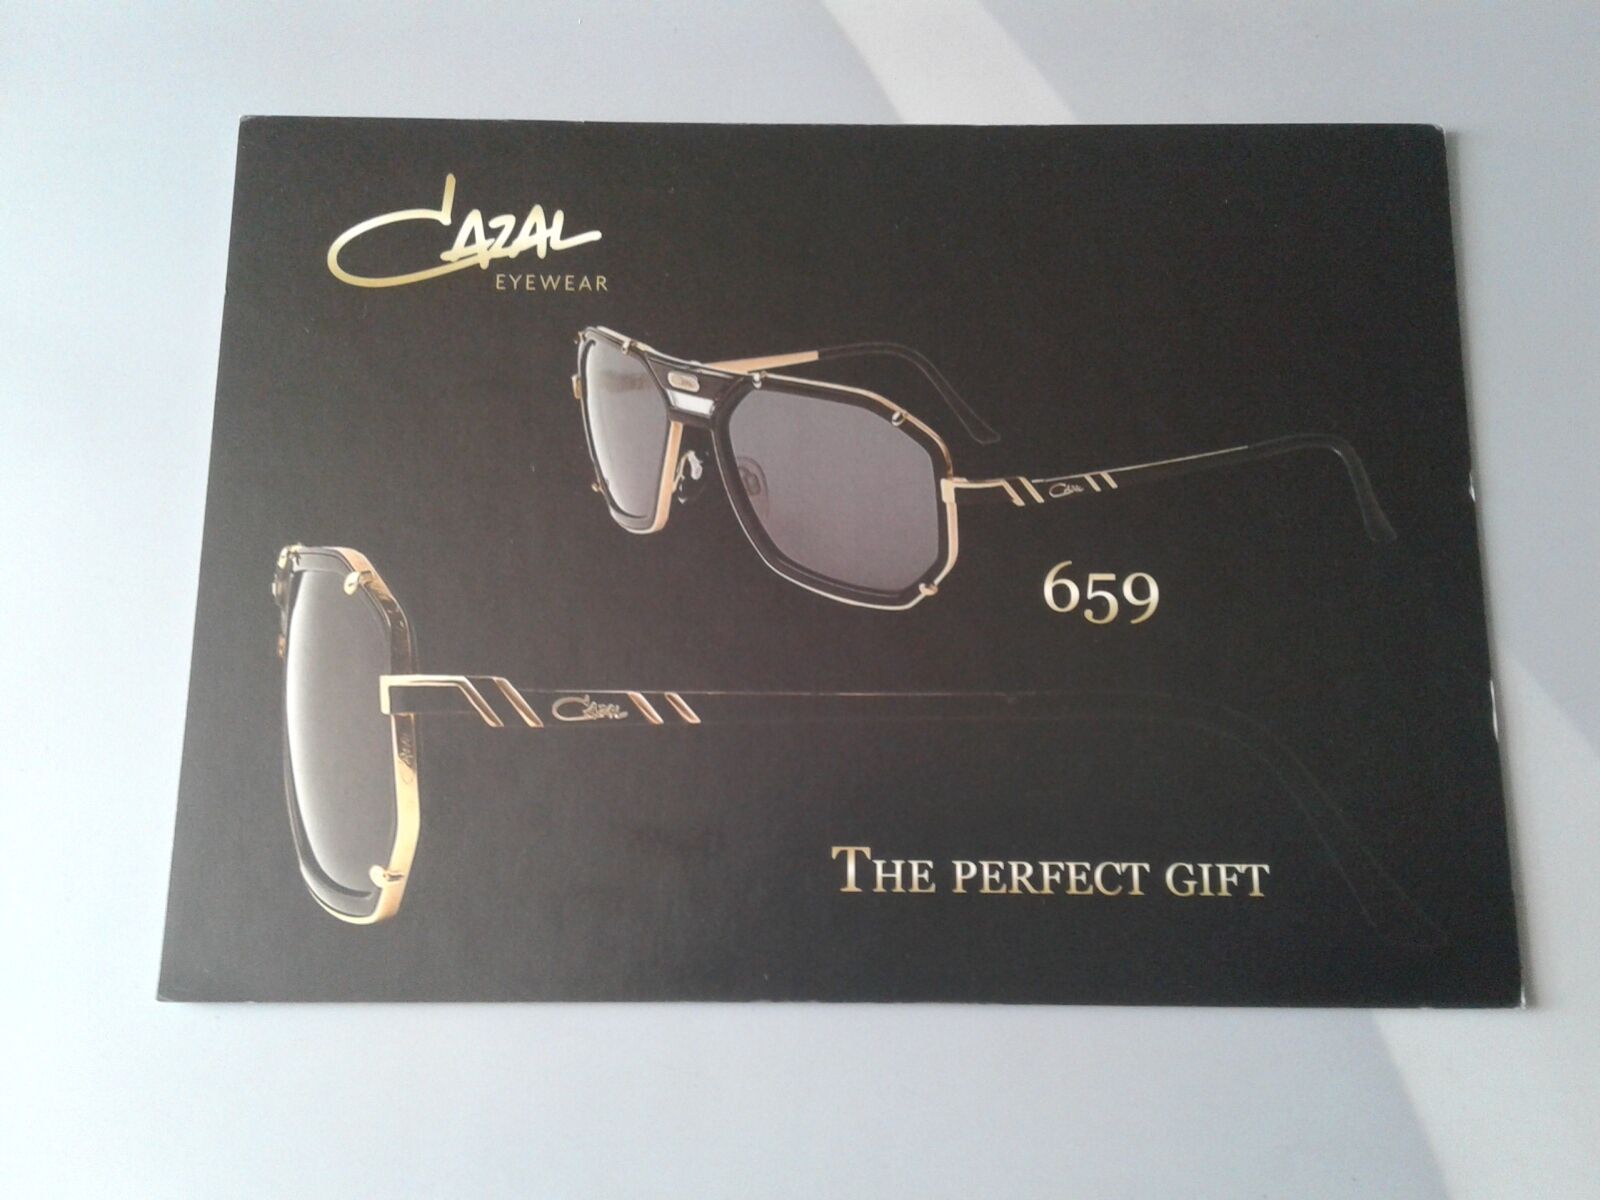 CAZAL THE PERFECT GIFT EYE WEAR COUNTERCARD POSTER  SIZE 10.5 X 7.5 INCHES